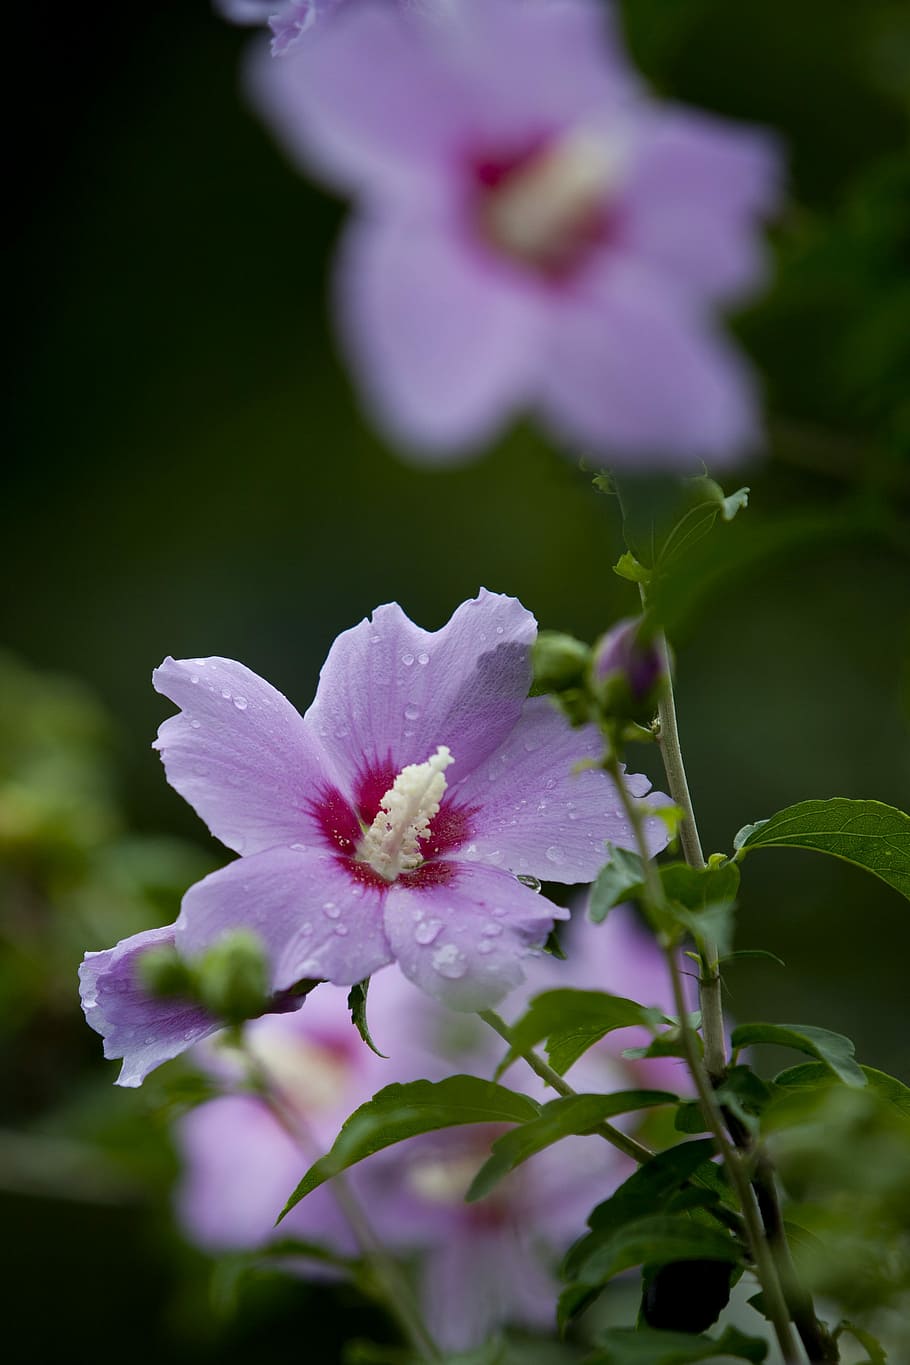 Nature, Plants, Flowers, Tabitha, park, pool, pink, after, rose of sharon